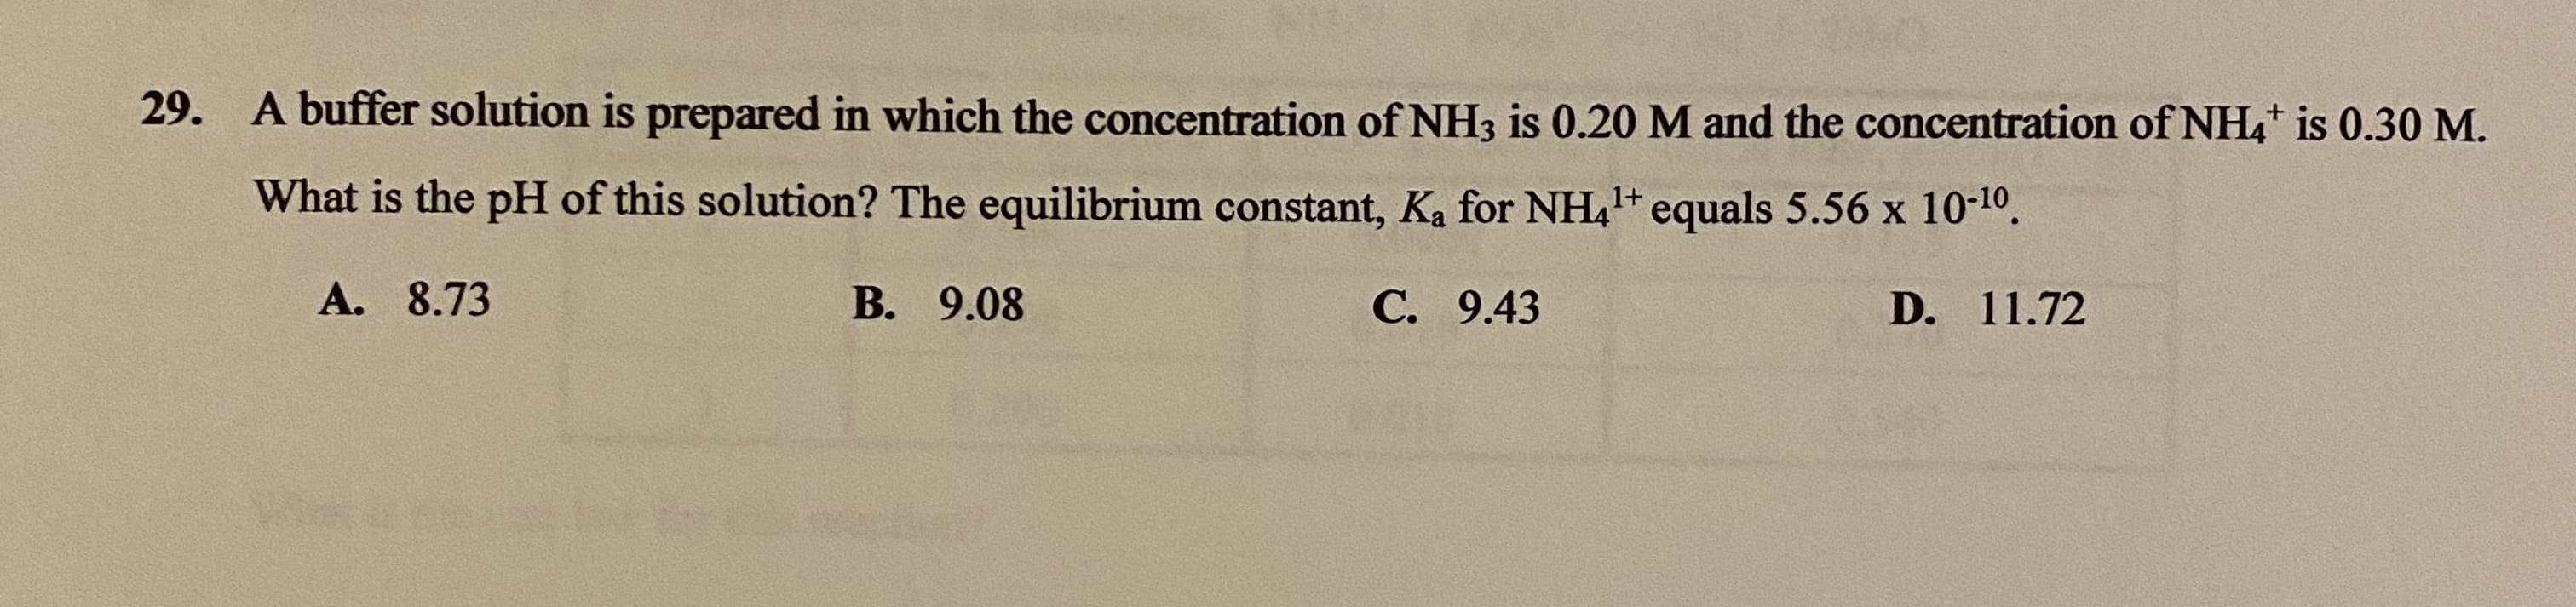 A buffer solution is prepared in which the concentration of NH3 is 0.20 M and the concentration of NH4* is 0.30 M.
What is the pH of this solution? The equilibrium constant, Ka for NH,1+ equals 5.56 x 10-10.
А. 8.73
В. 9.08
С. 9.43
D. 11.72
